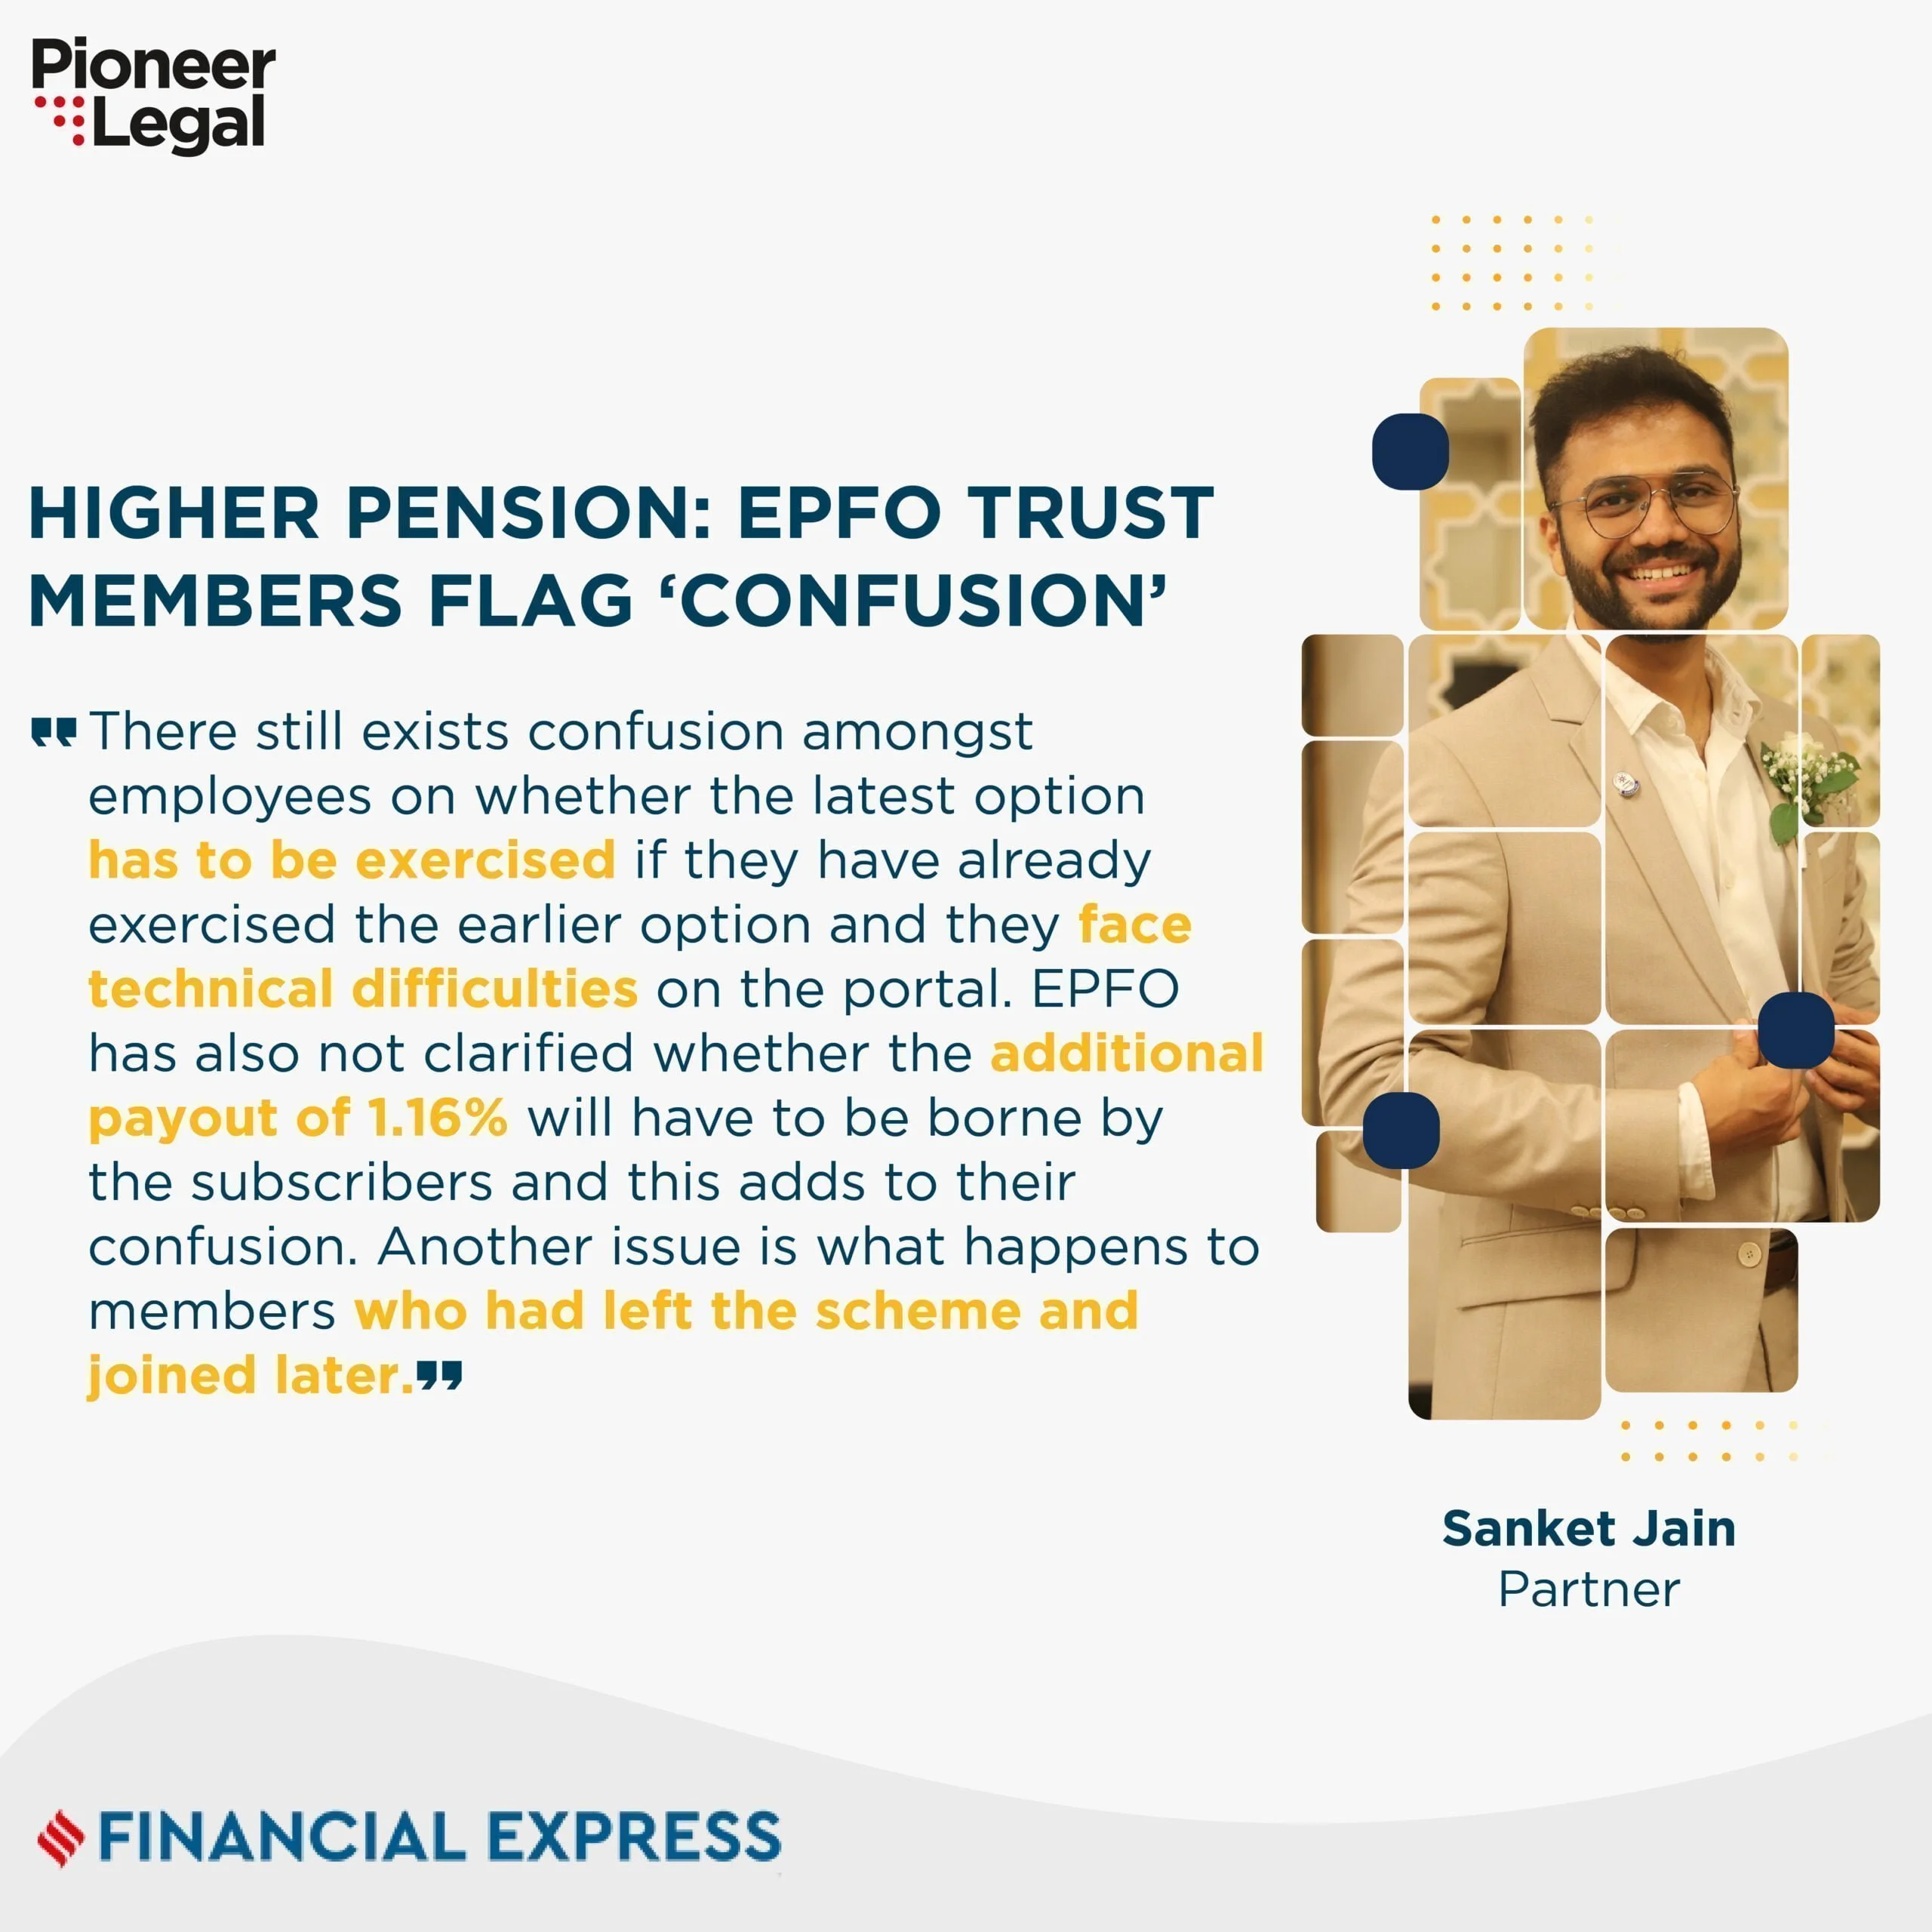 Pioneer Legal - Higher Pension: EPFO Trust members flag "Confusion"